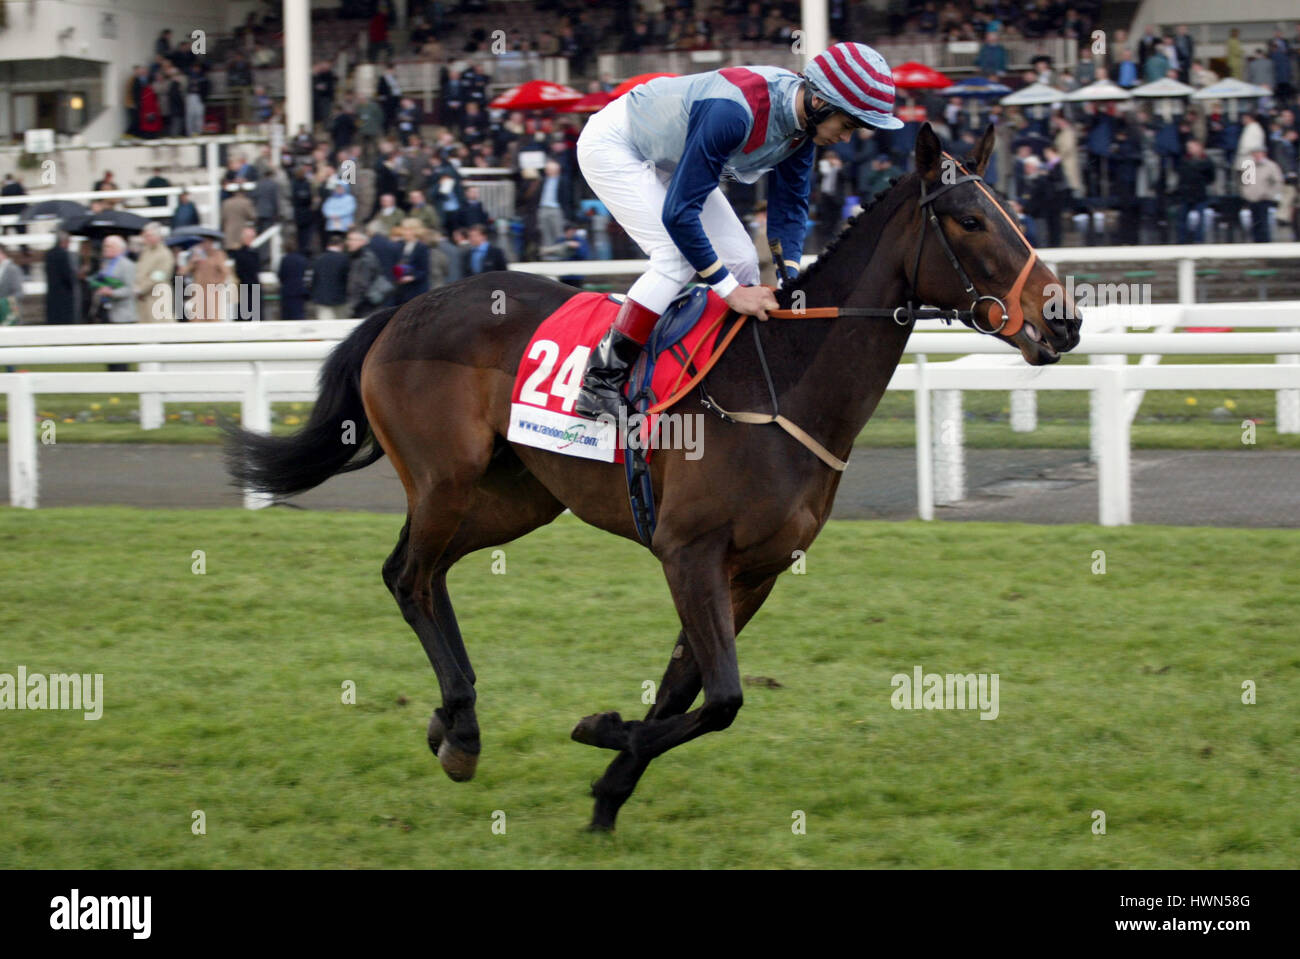 LOOKING FOR LOVE RIDDEN BY L.NEWMAN DONCASTER RACECOURSE DONCASTER 21 March 2002 Stock Photo